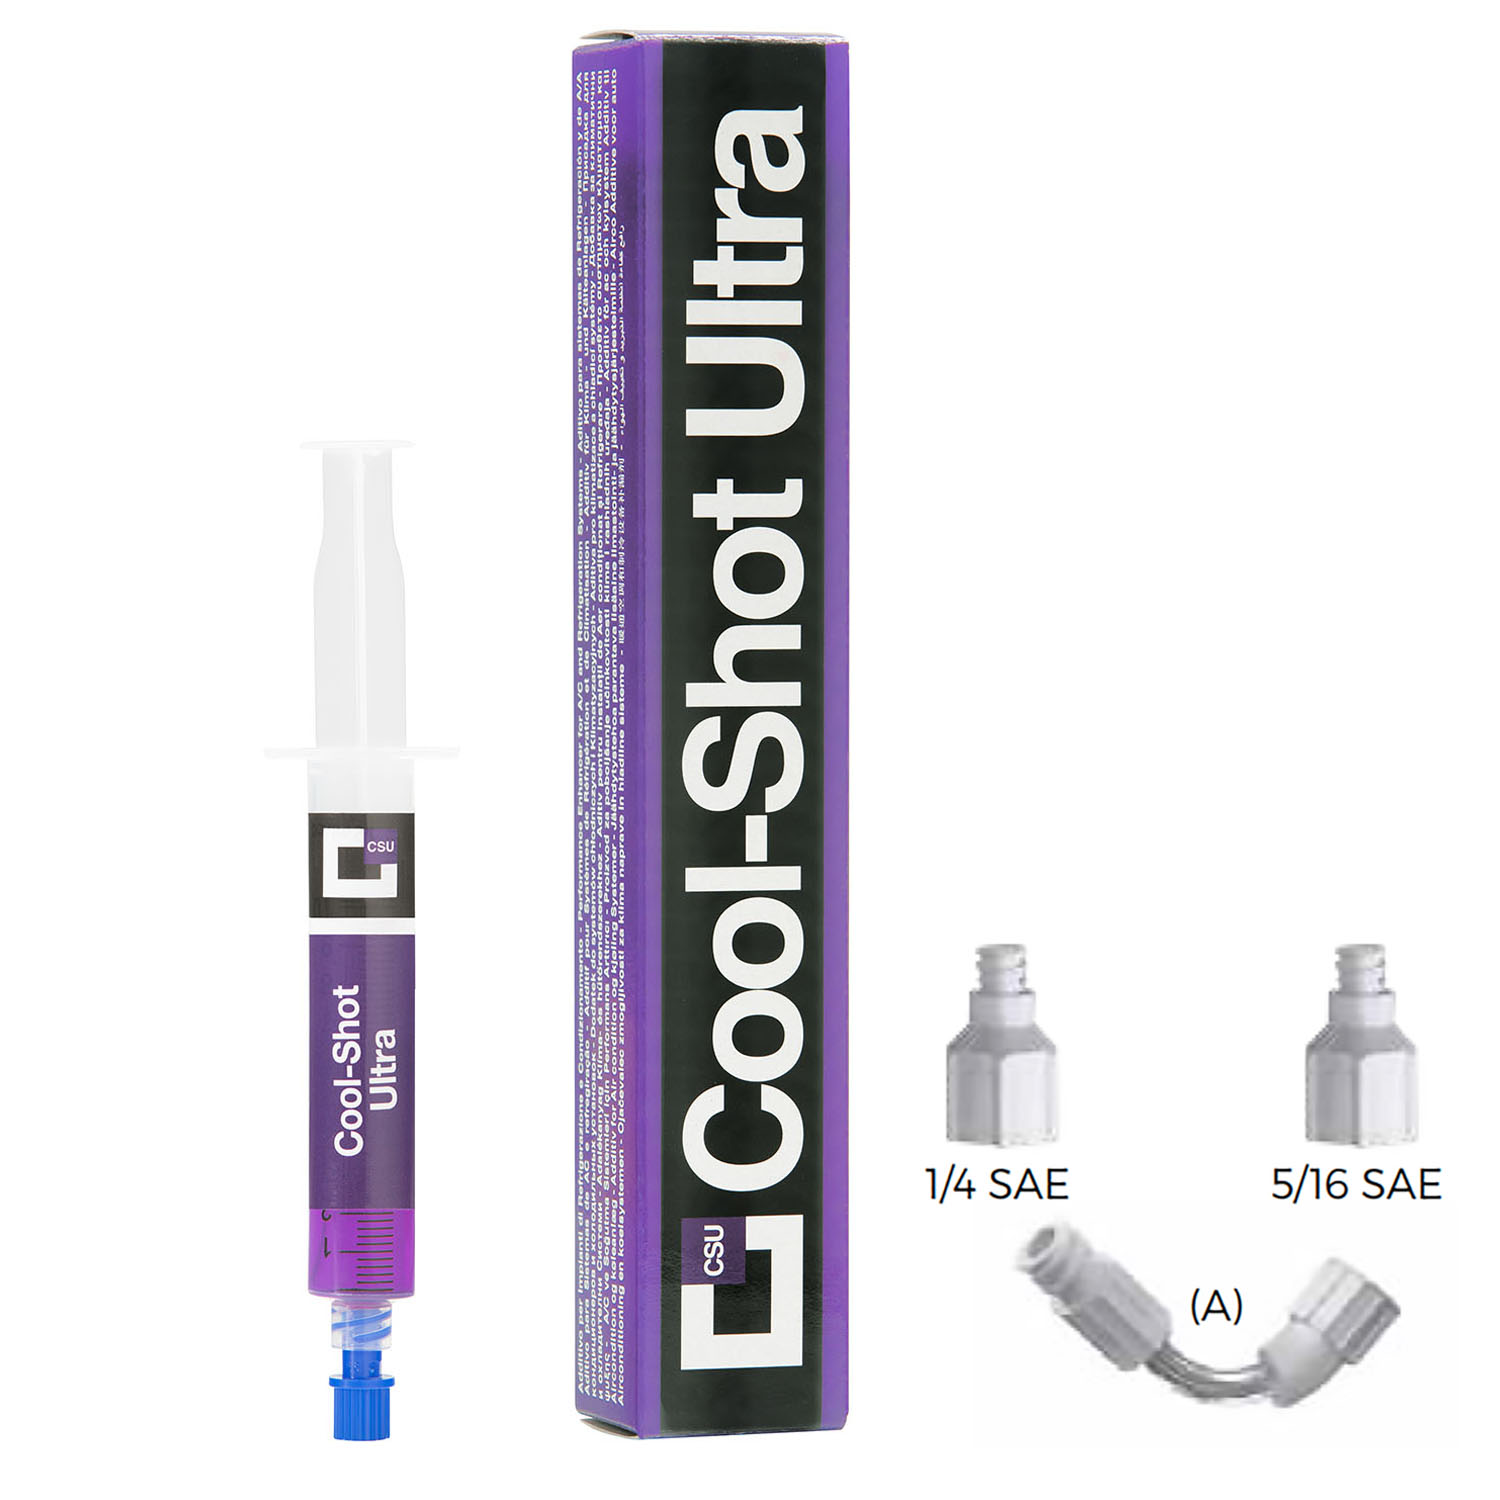 Performance Enhancer (with adapters 1/4 SAE + 5/16 SAE + flexible hose) - COOL SHOT ULTRA - Cartridge 6 ml - Package # 1 pc.